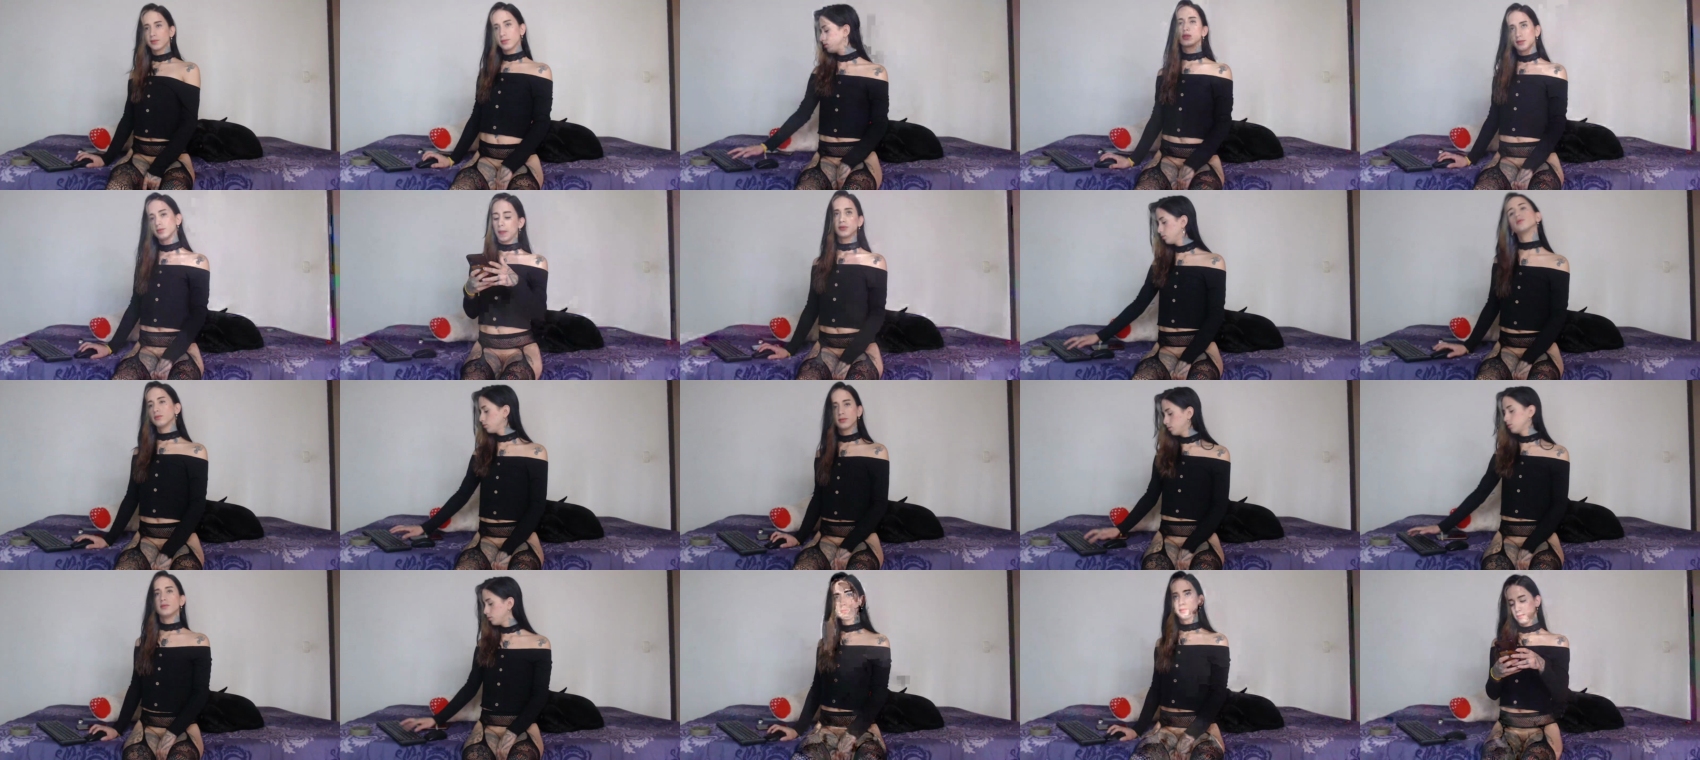 mely_roussex  22-03-2022 Trans squirt